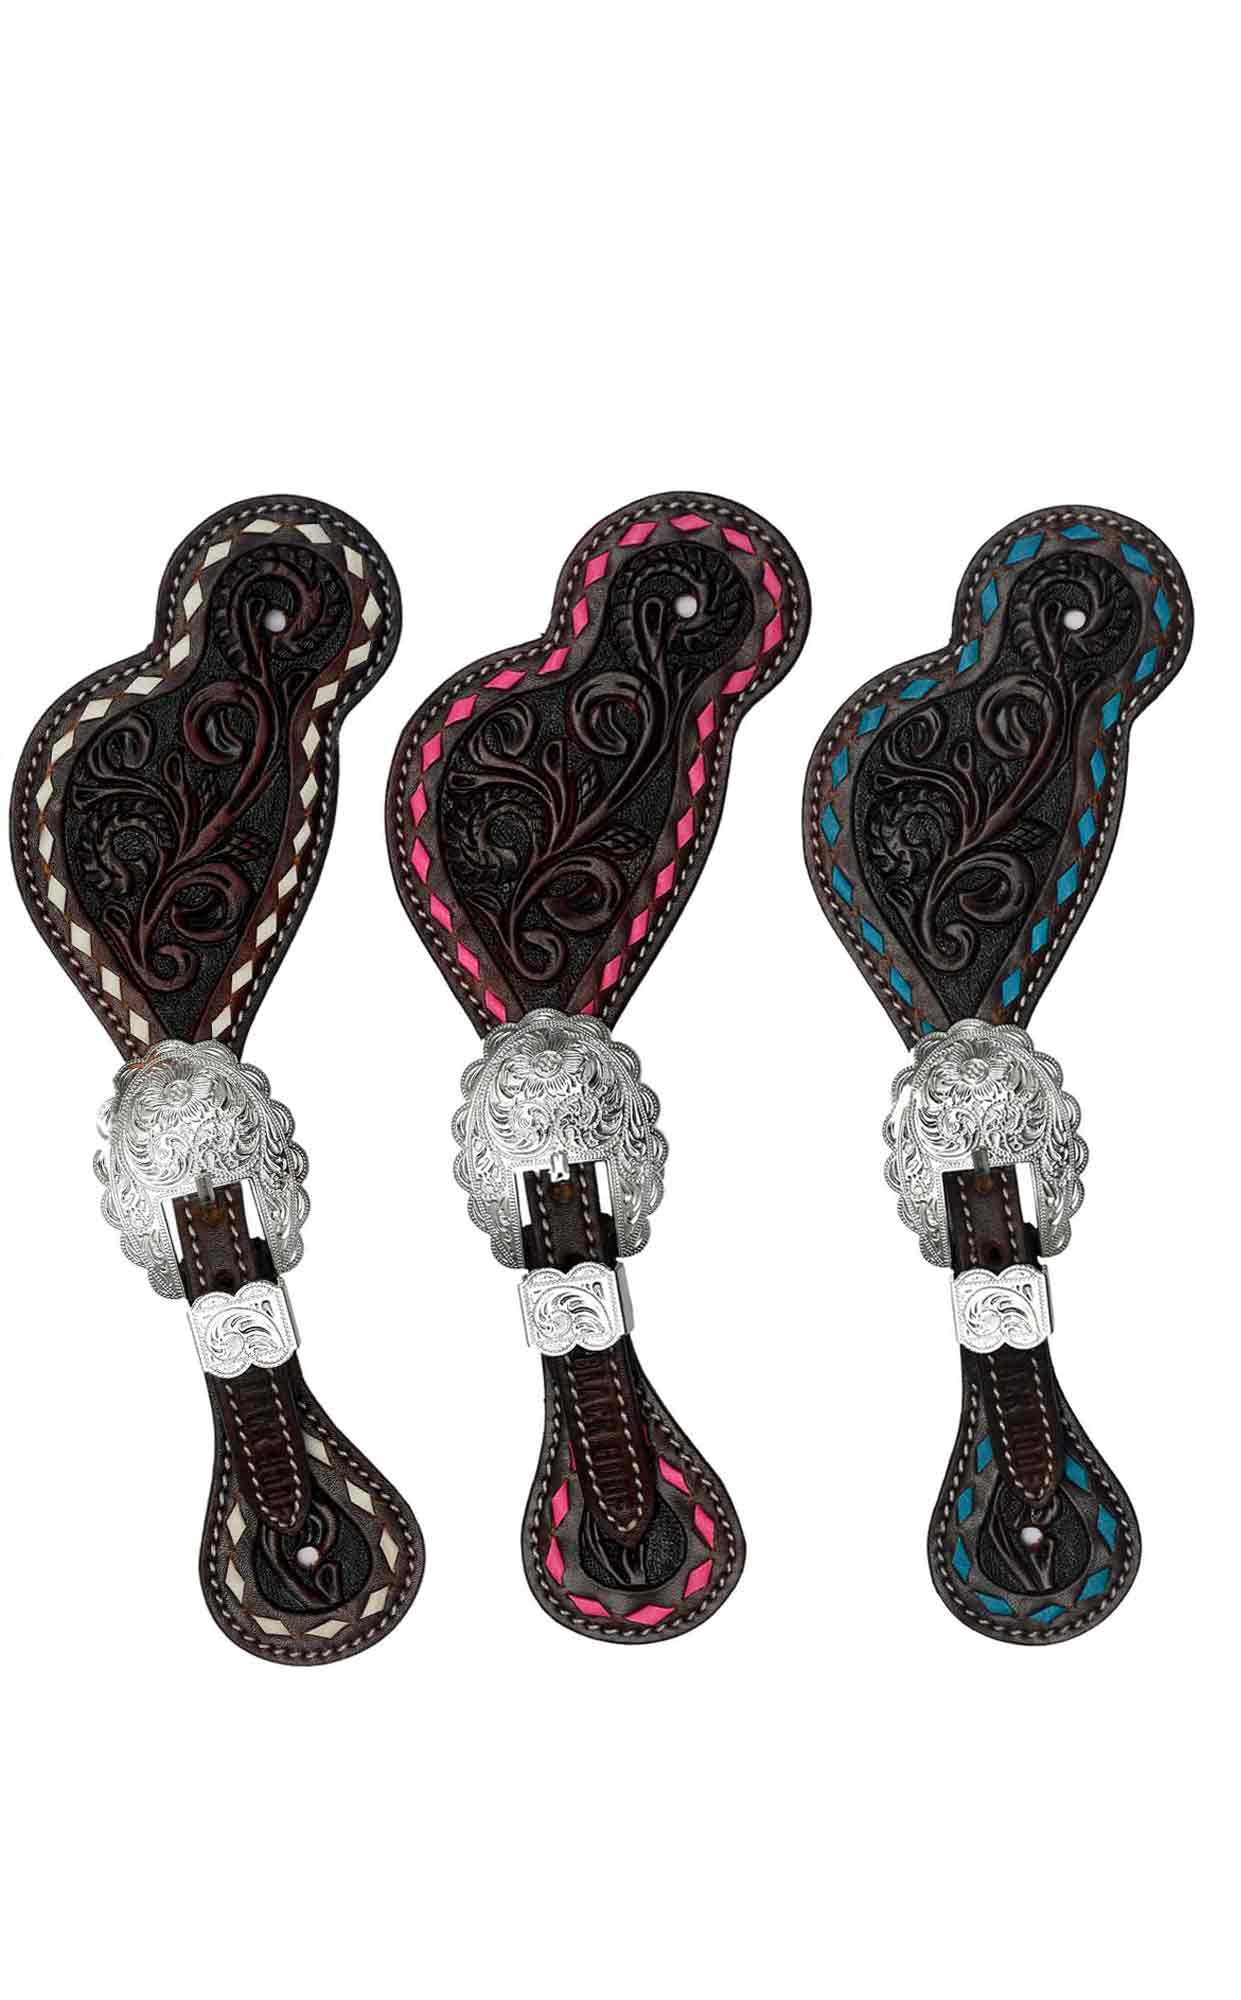 Black Hoof  Floral Tooled Leather Spur Straps with Buckstitch Design for Horse Riders | Western Men, Women, Adjustable Single Ply Spur Straps | Equestrian Accessories